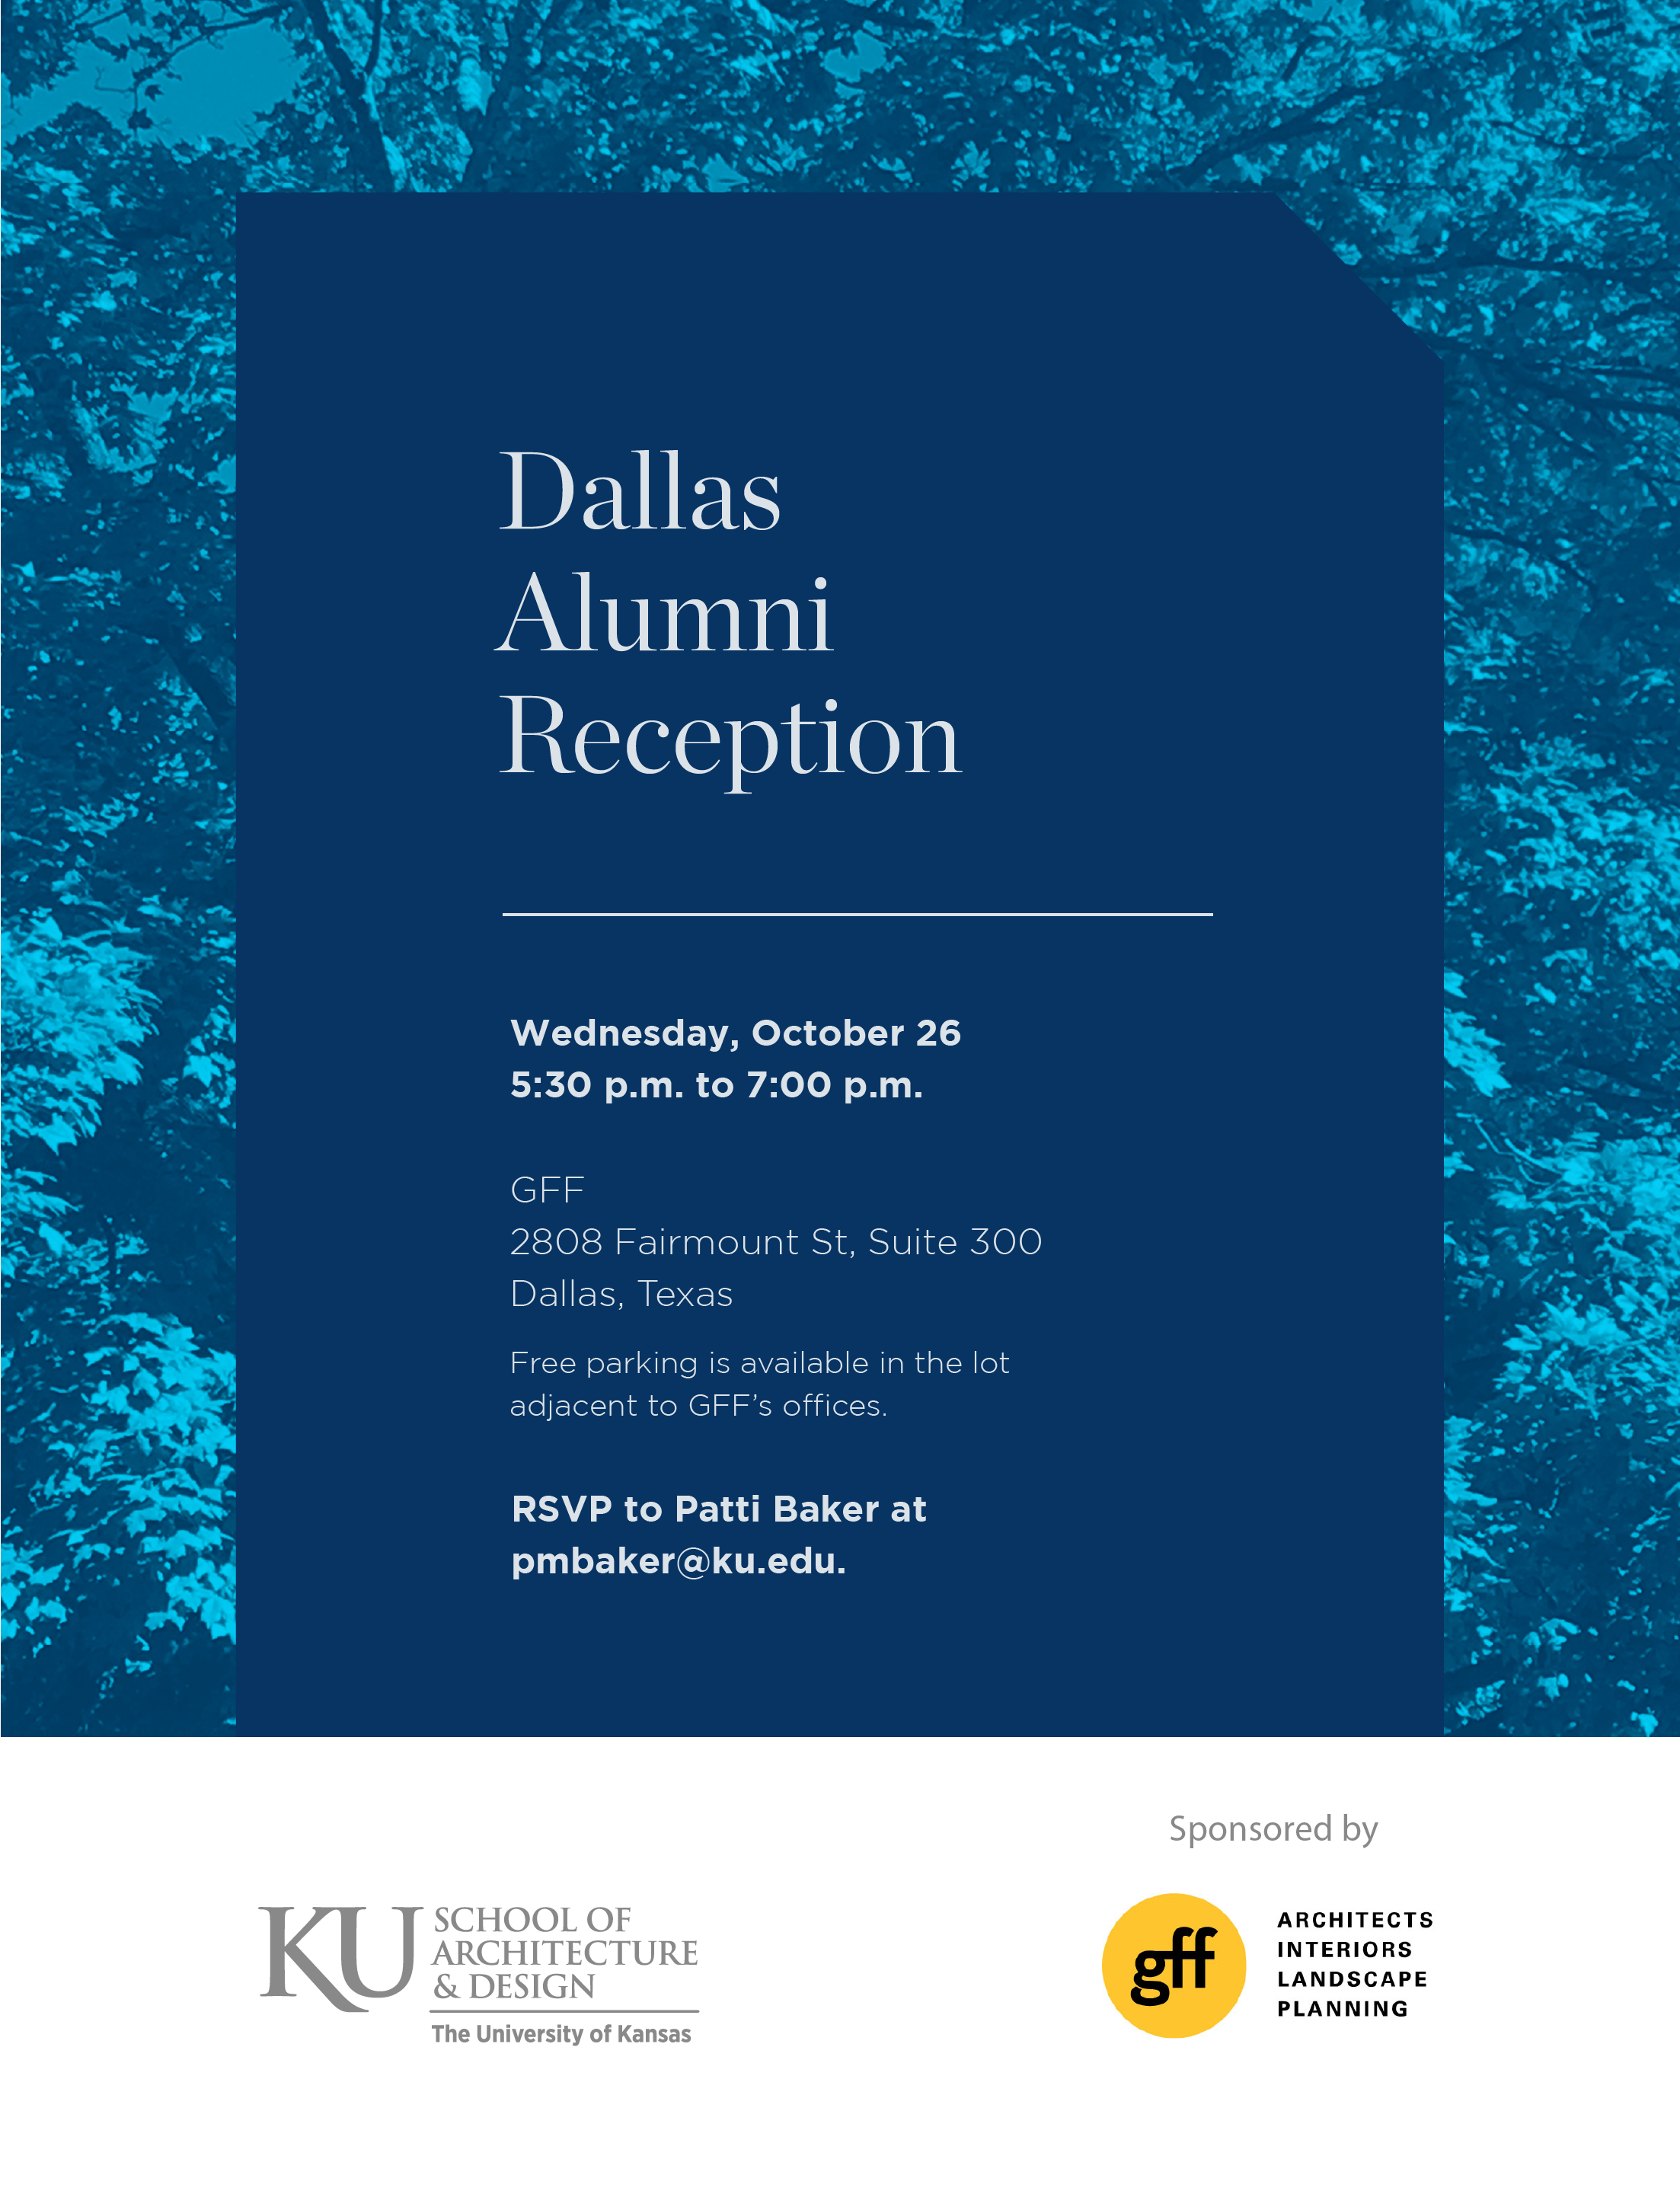 Text says 'KU School of Architecture & Design. Dallas Alumni Reception. Wednesday, October 26, 5:30pm to 7:00pm. Sponsored by GFF. 